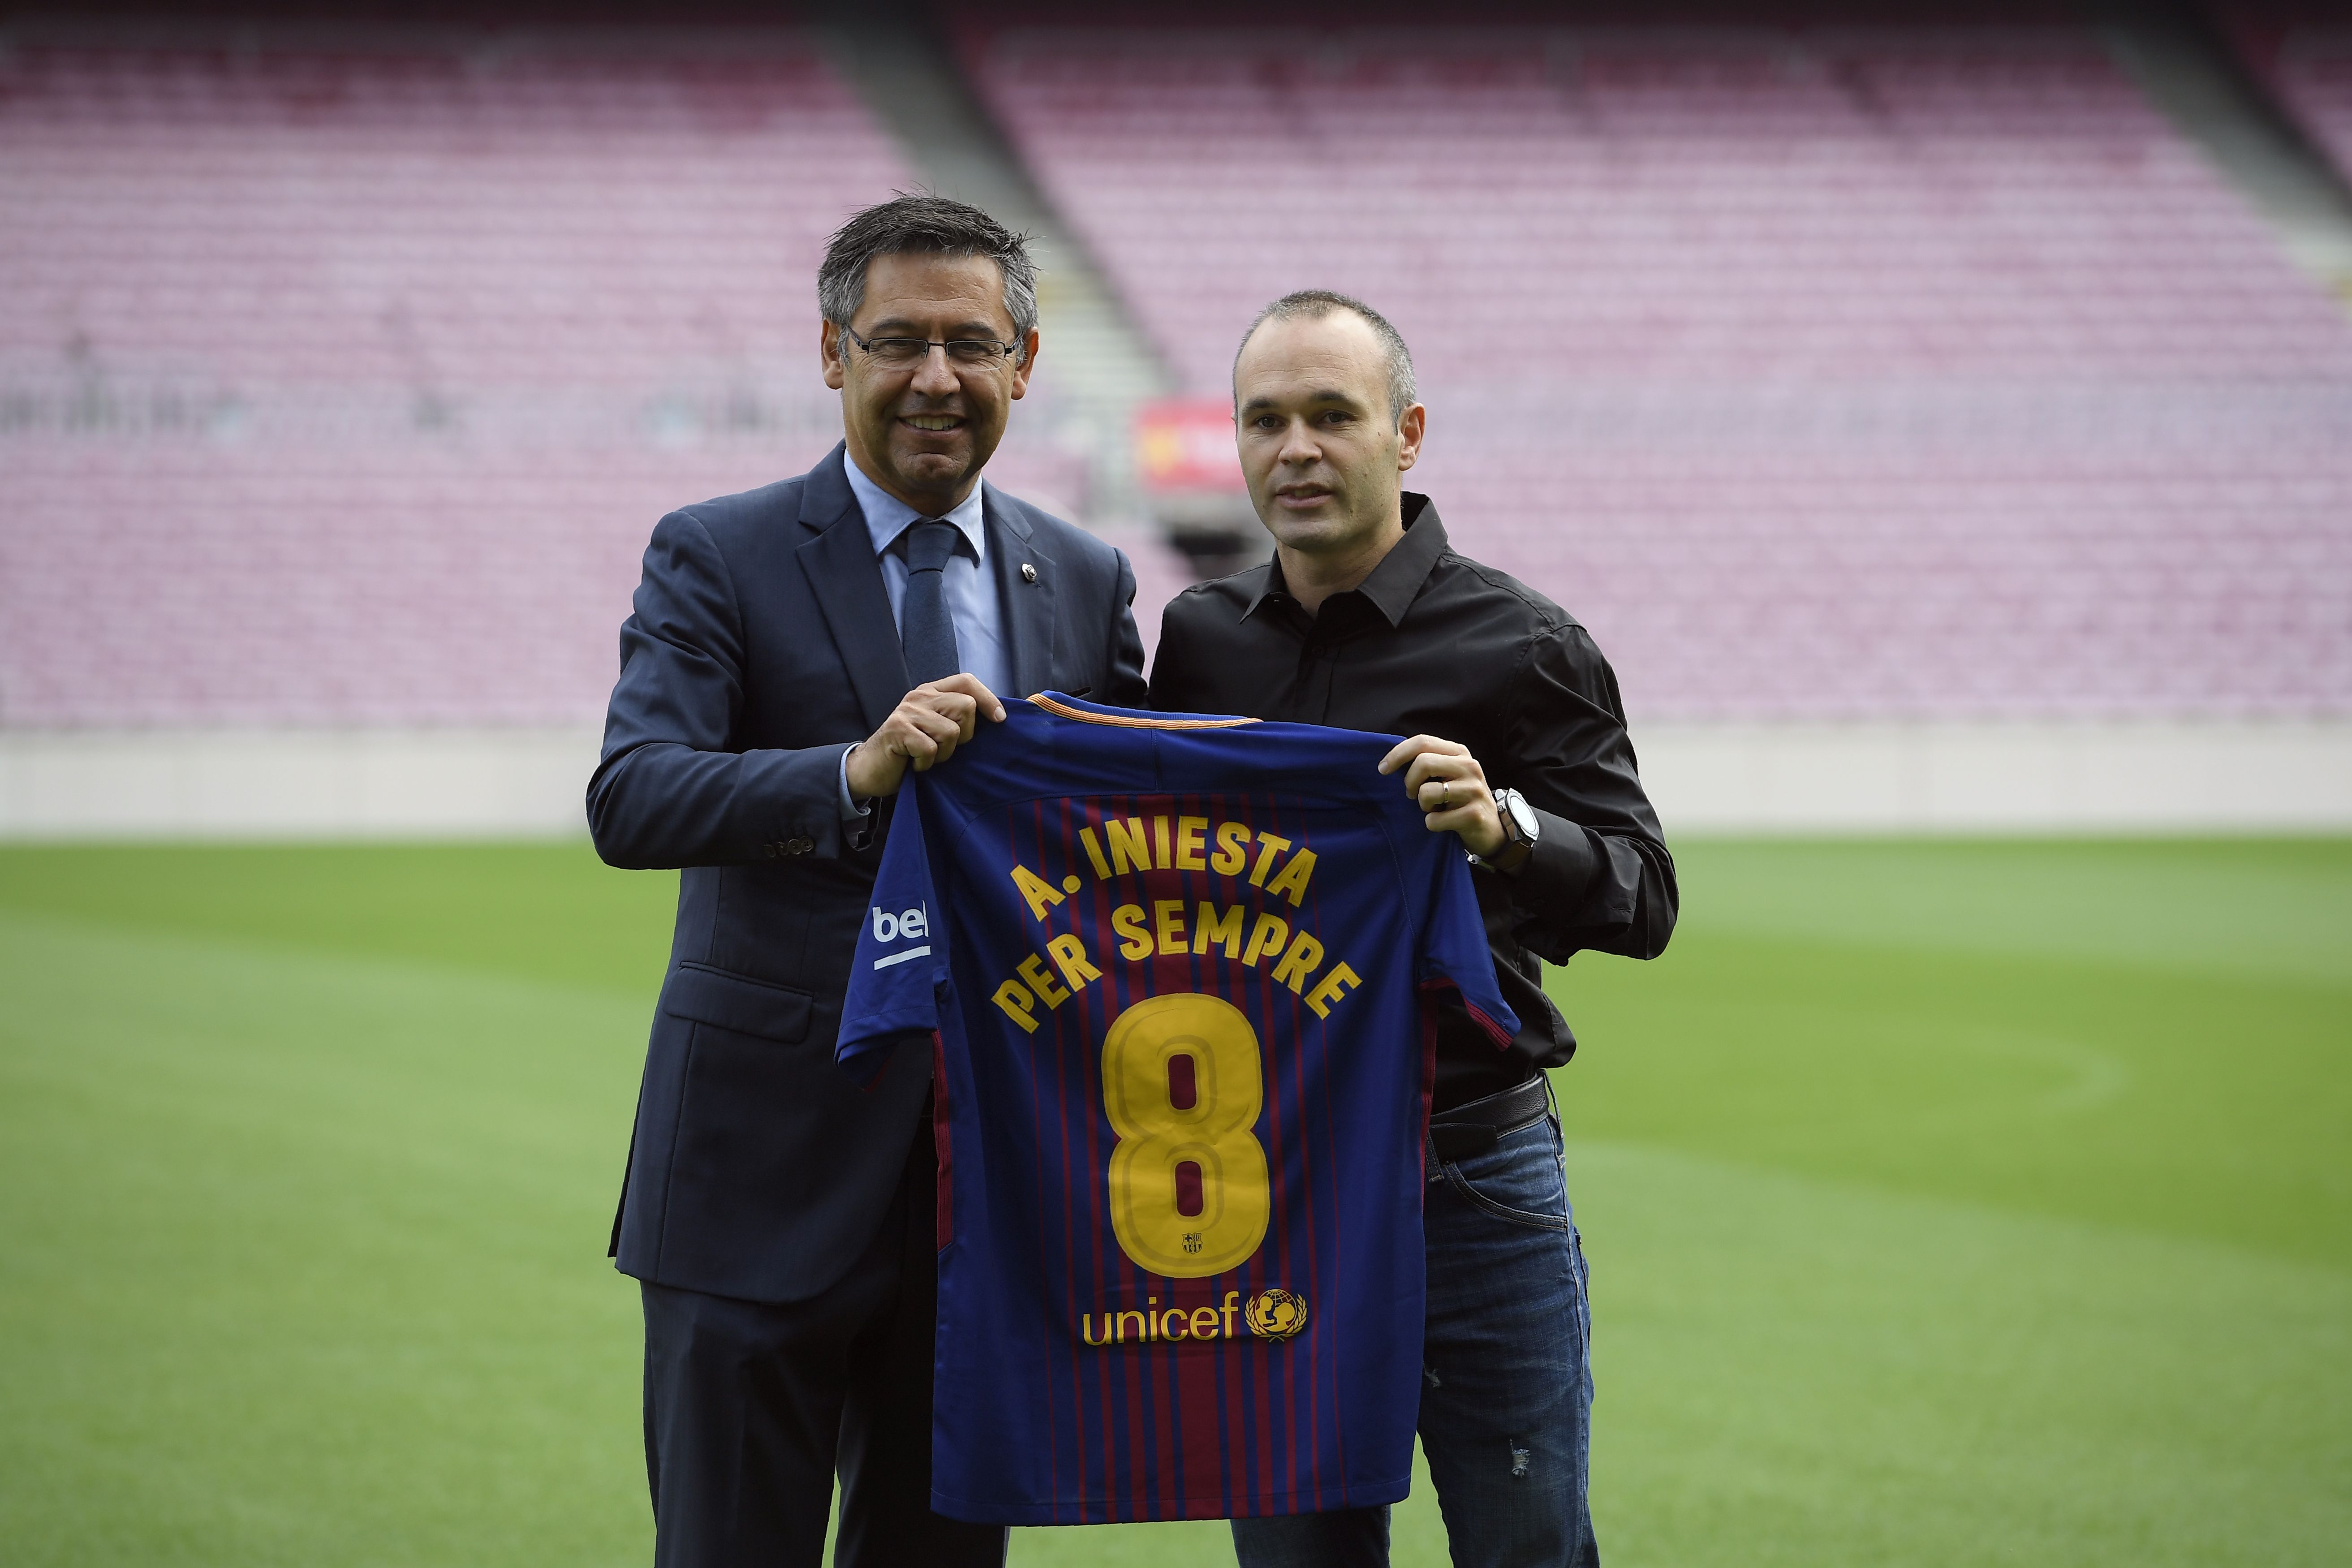 Barcelona's midfielder Andres Iniesta poses with a special Barcelona FC jersey next to the Catalan club's president Josep Maria Bartomeu (L) after renewing his contract at the Camp Nou in Barcelona on October 6, 2017.
Barcelona tied down captain Andres Iniesta for the rest of his career as the club announced the 33-year-old midfielder has agreed a "lifetime contract". Normally determined to shy away from the spotlight, Iniesta spoke out to urge negotiation and prevent a spiralling political crisis over the battle for Catalan independence deepening. / AFP PHOTO / LLUIS GENE        (Photo credit should read LLUIS GENE/AFP/Getty Images)